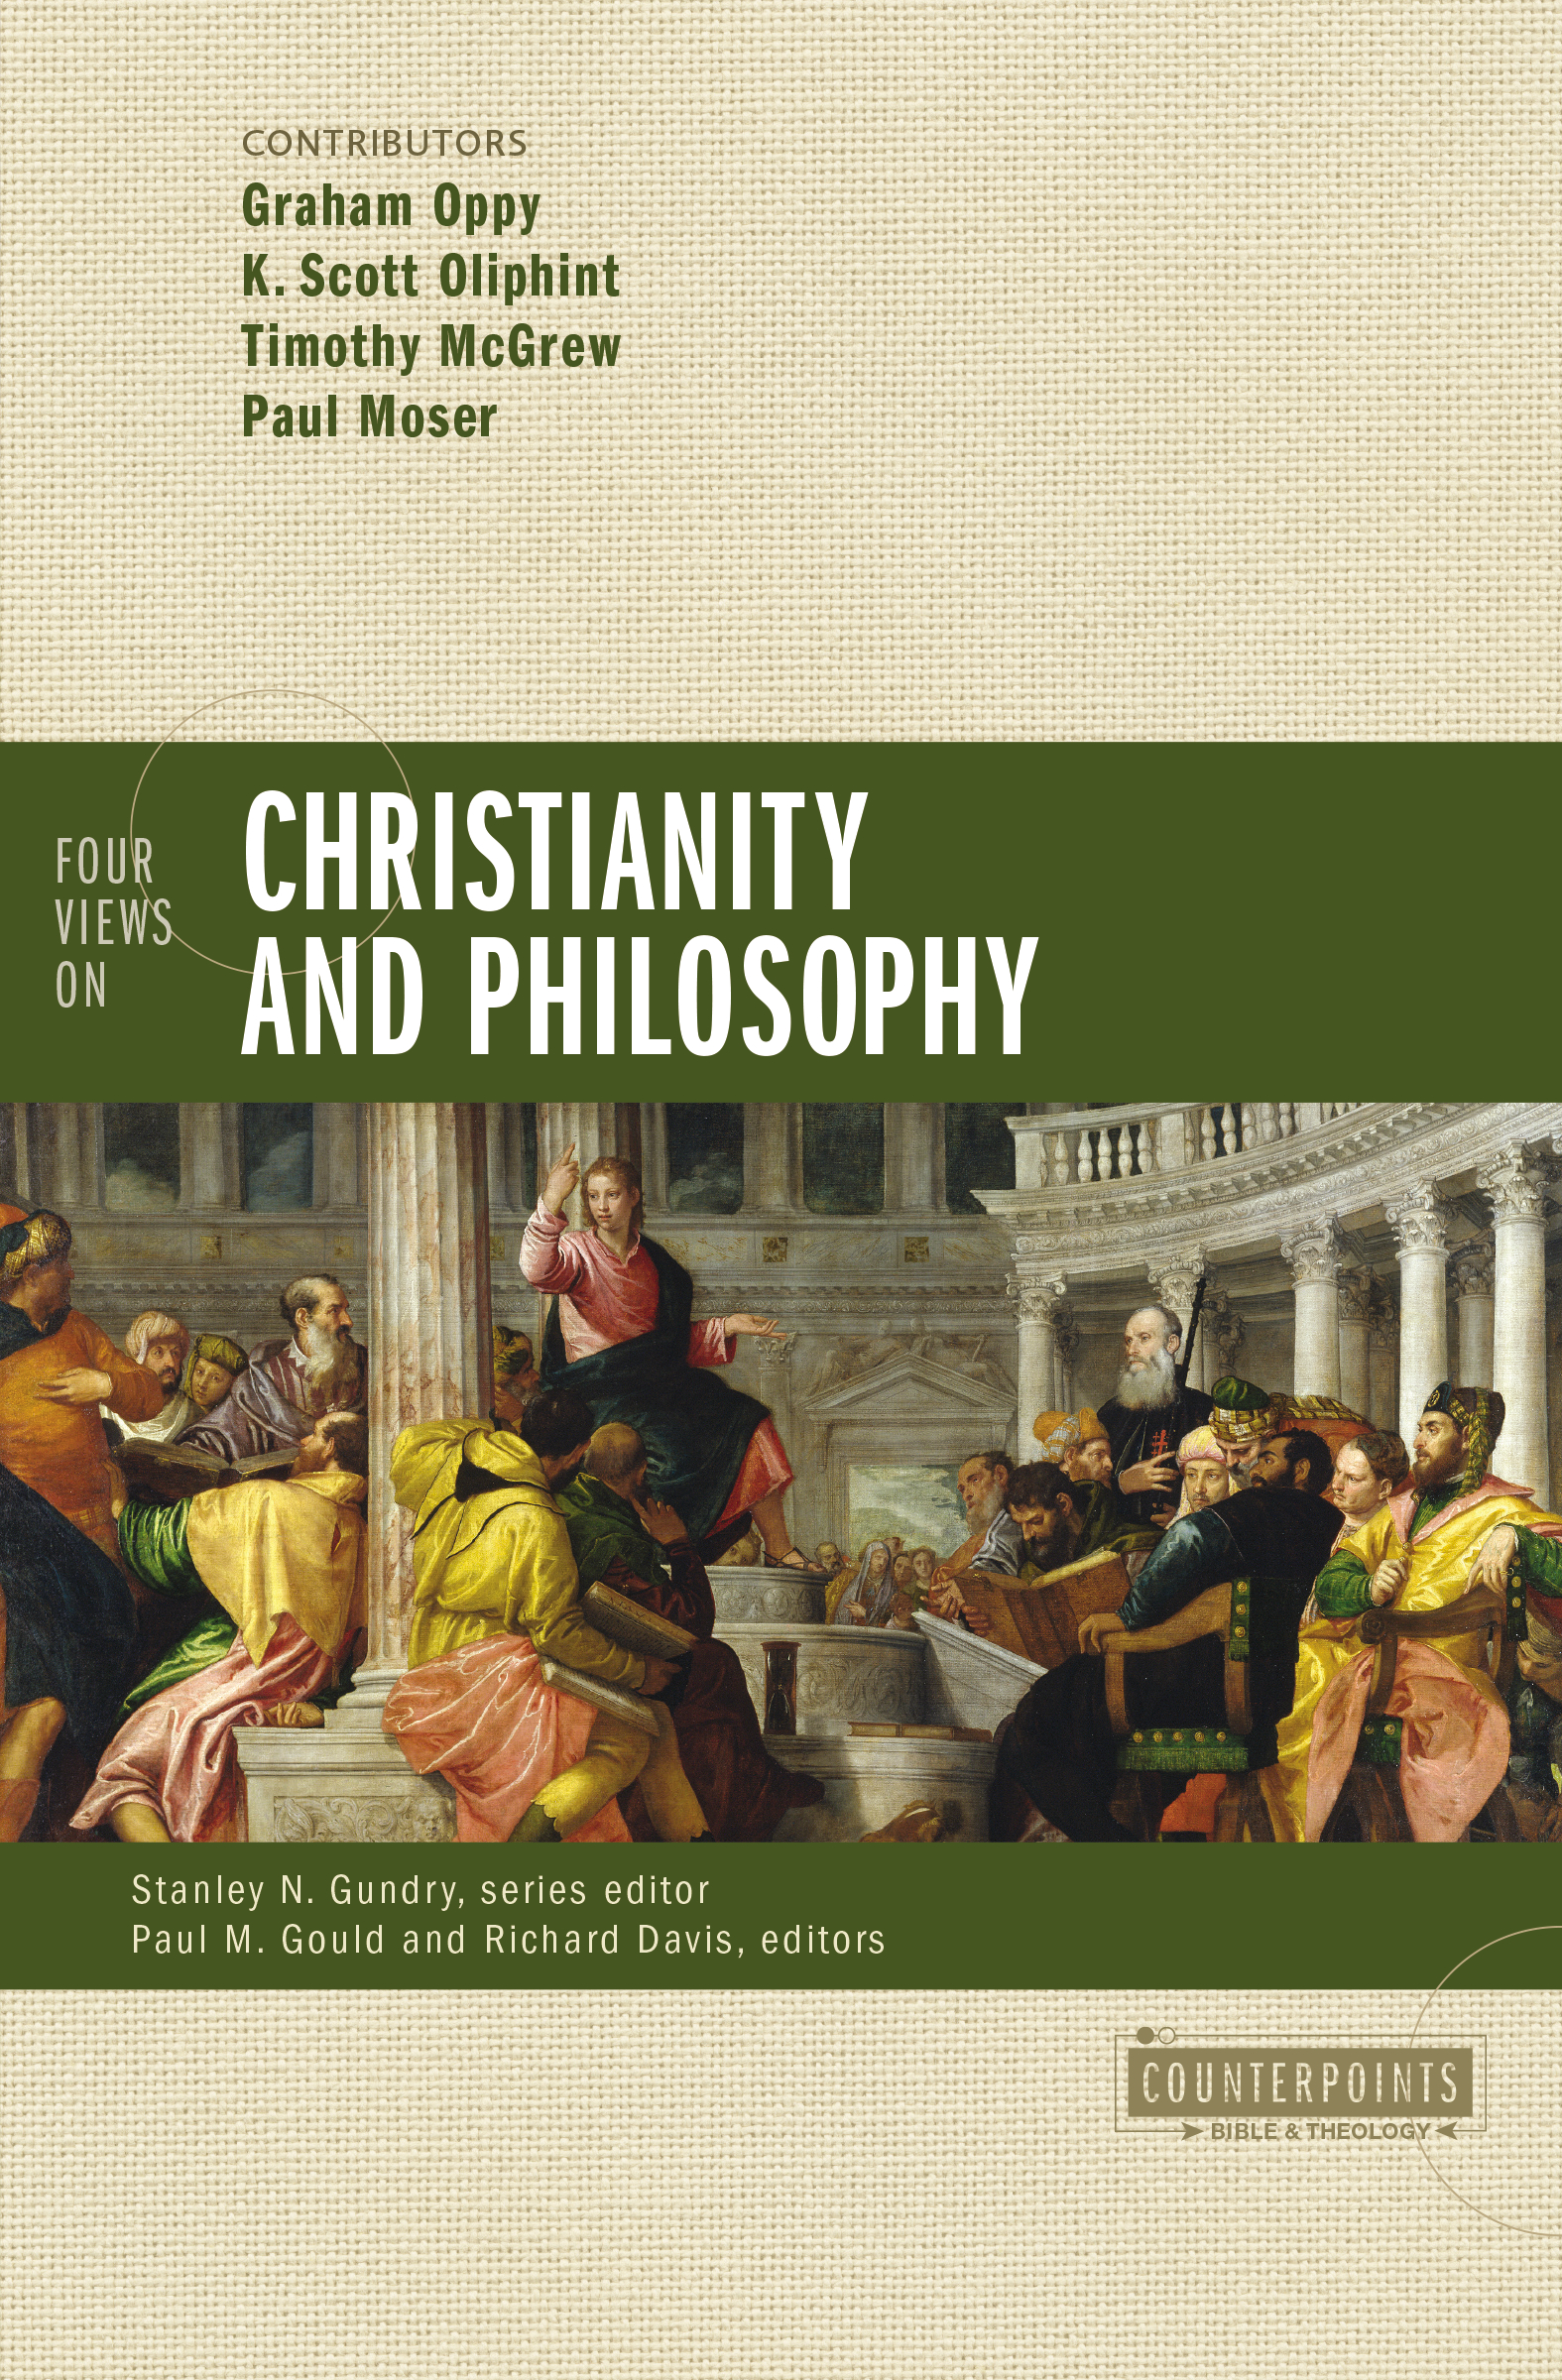 Four Views on Christianity and Philosophy